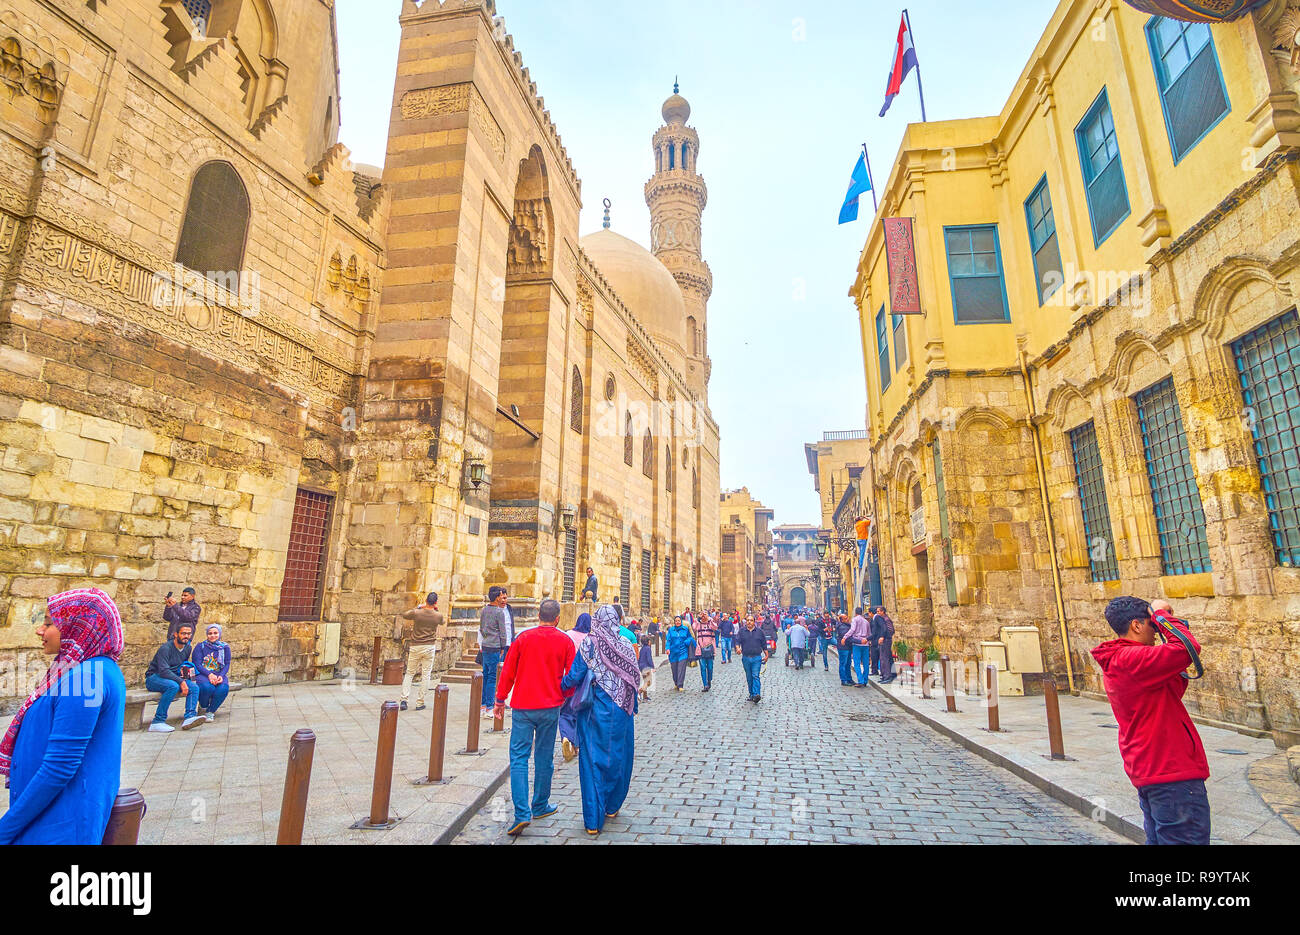 CAIRO, EGYPT - DECEMBER 20, 2017: The historical Al-Muizz street is a very photogenic place to make beautiful photos with scenic background, on Decemb Stock Photo